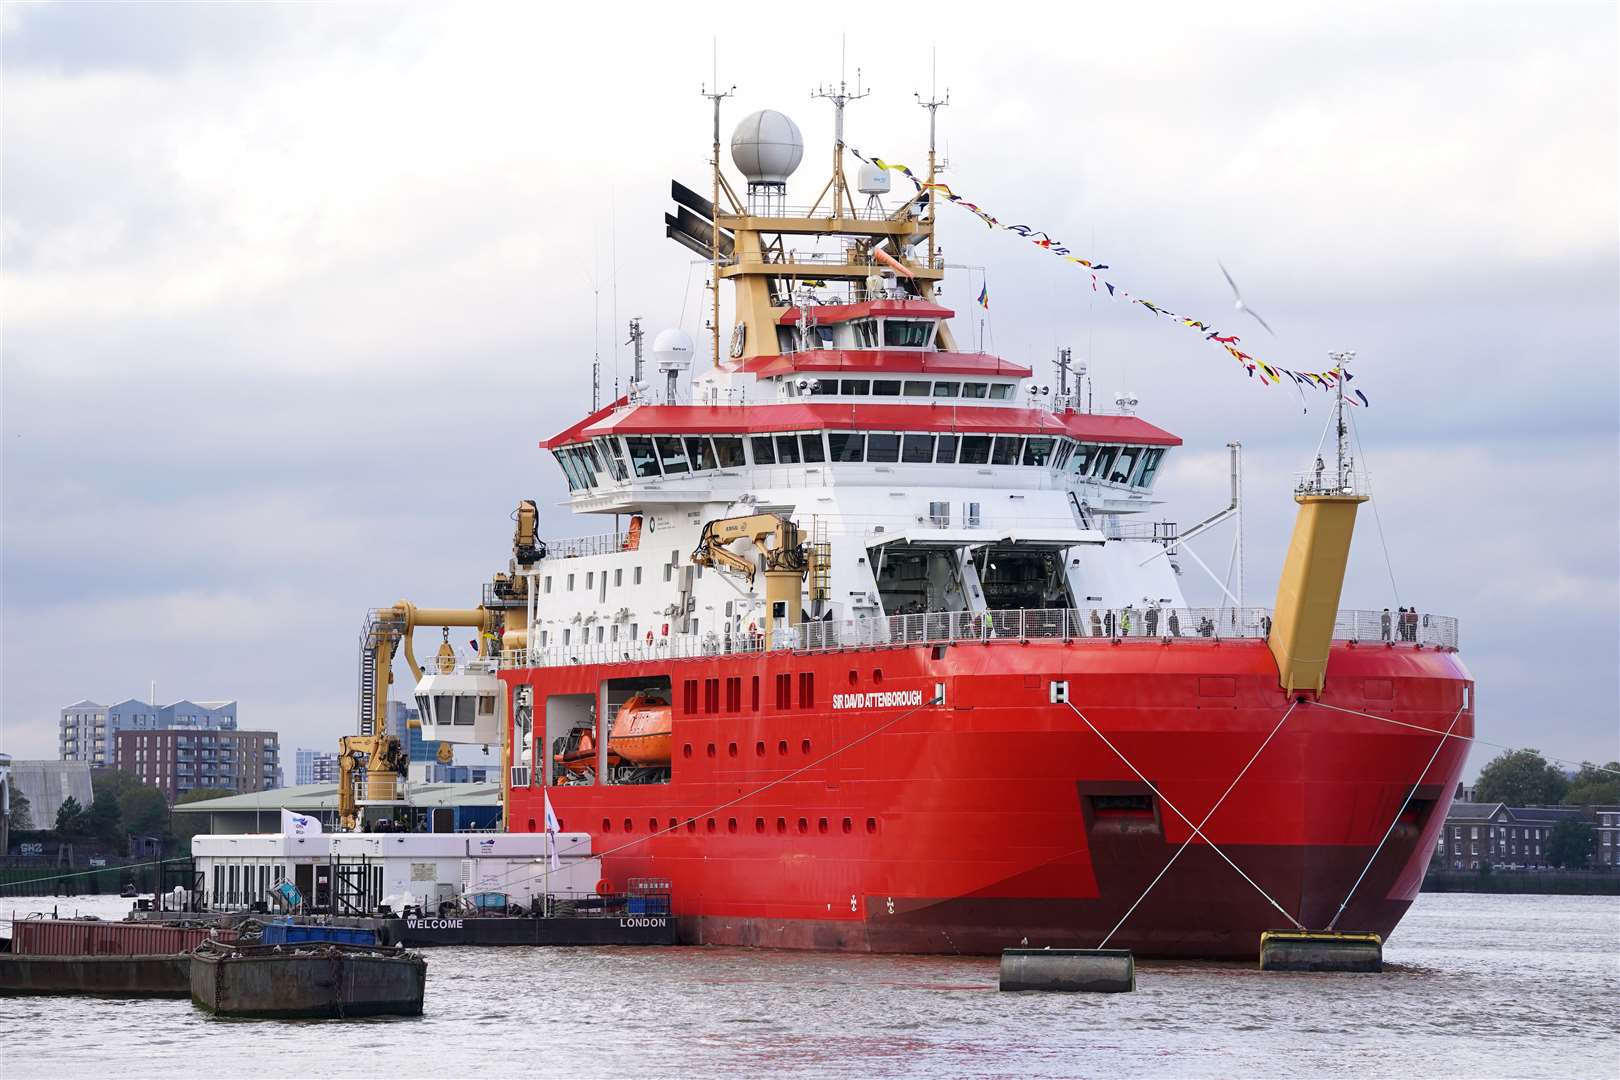 The UK should have another polar ship like the RRS David Attenborough to boost scientific research in the Arctic, MPs said (Kirsty O’Connor/PA)